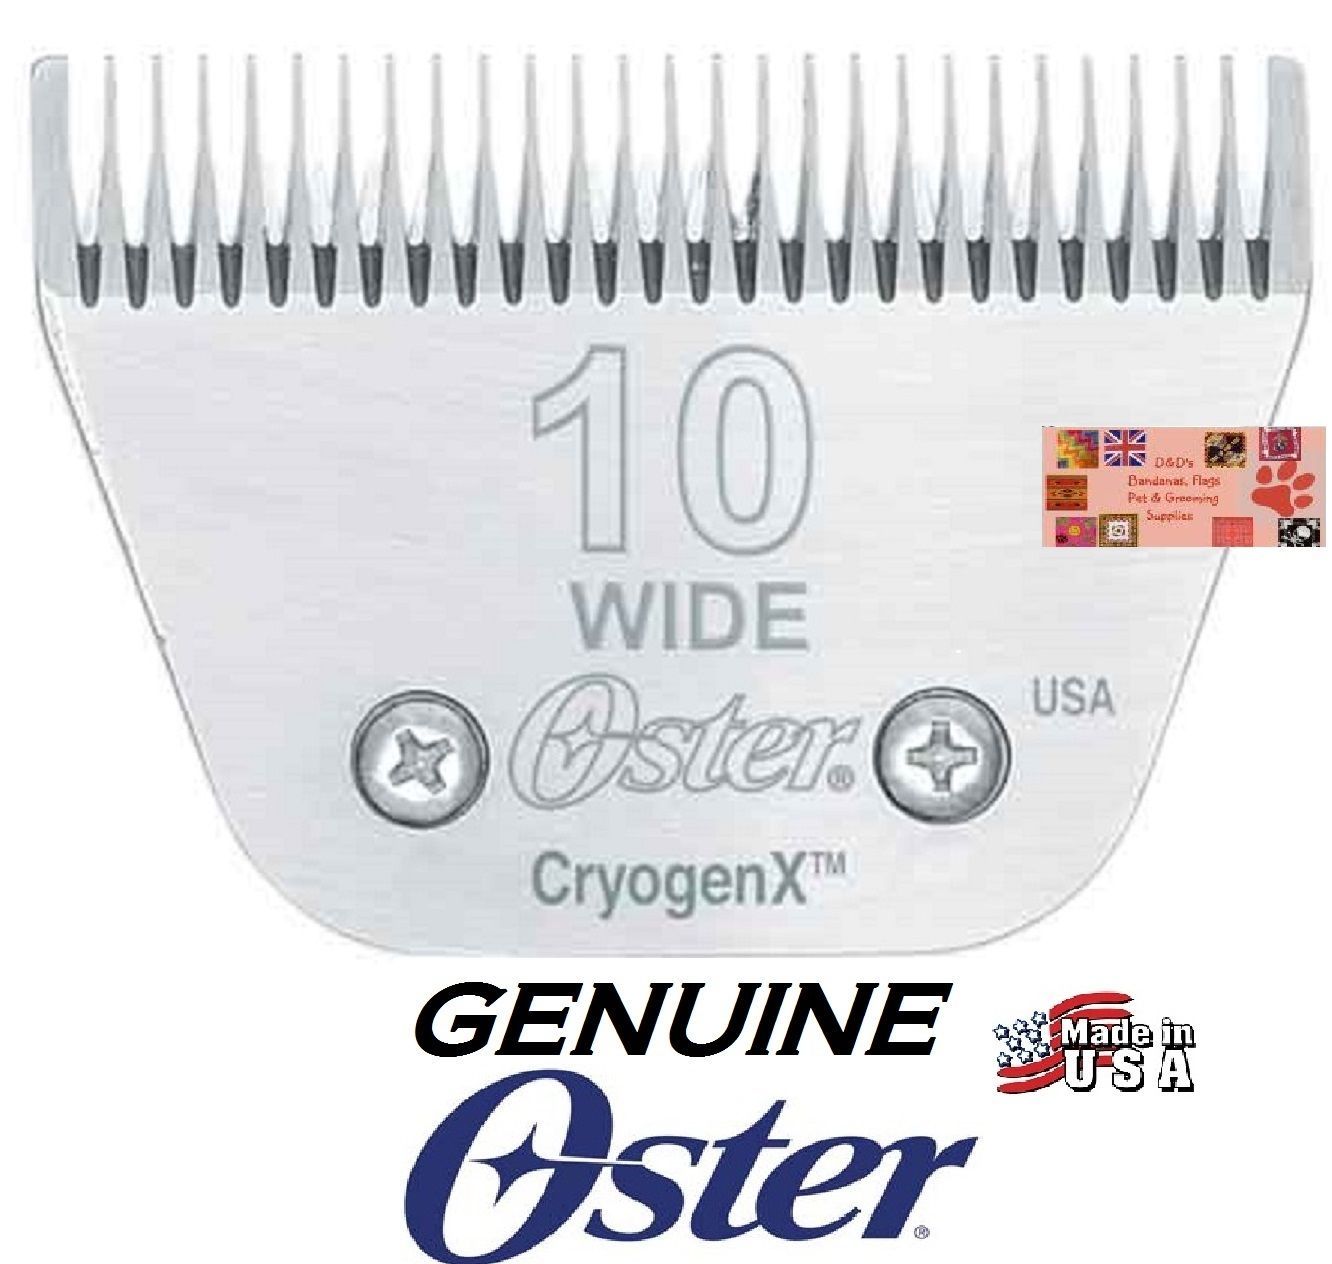 GENUINE Oster A5 Cryogen-X 10 WIDE BLADE*FitMost Andis,Wahl Clipper PET GROOMING